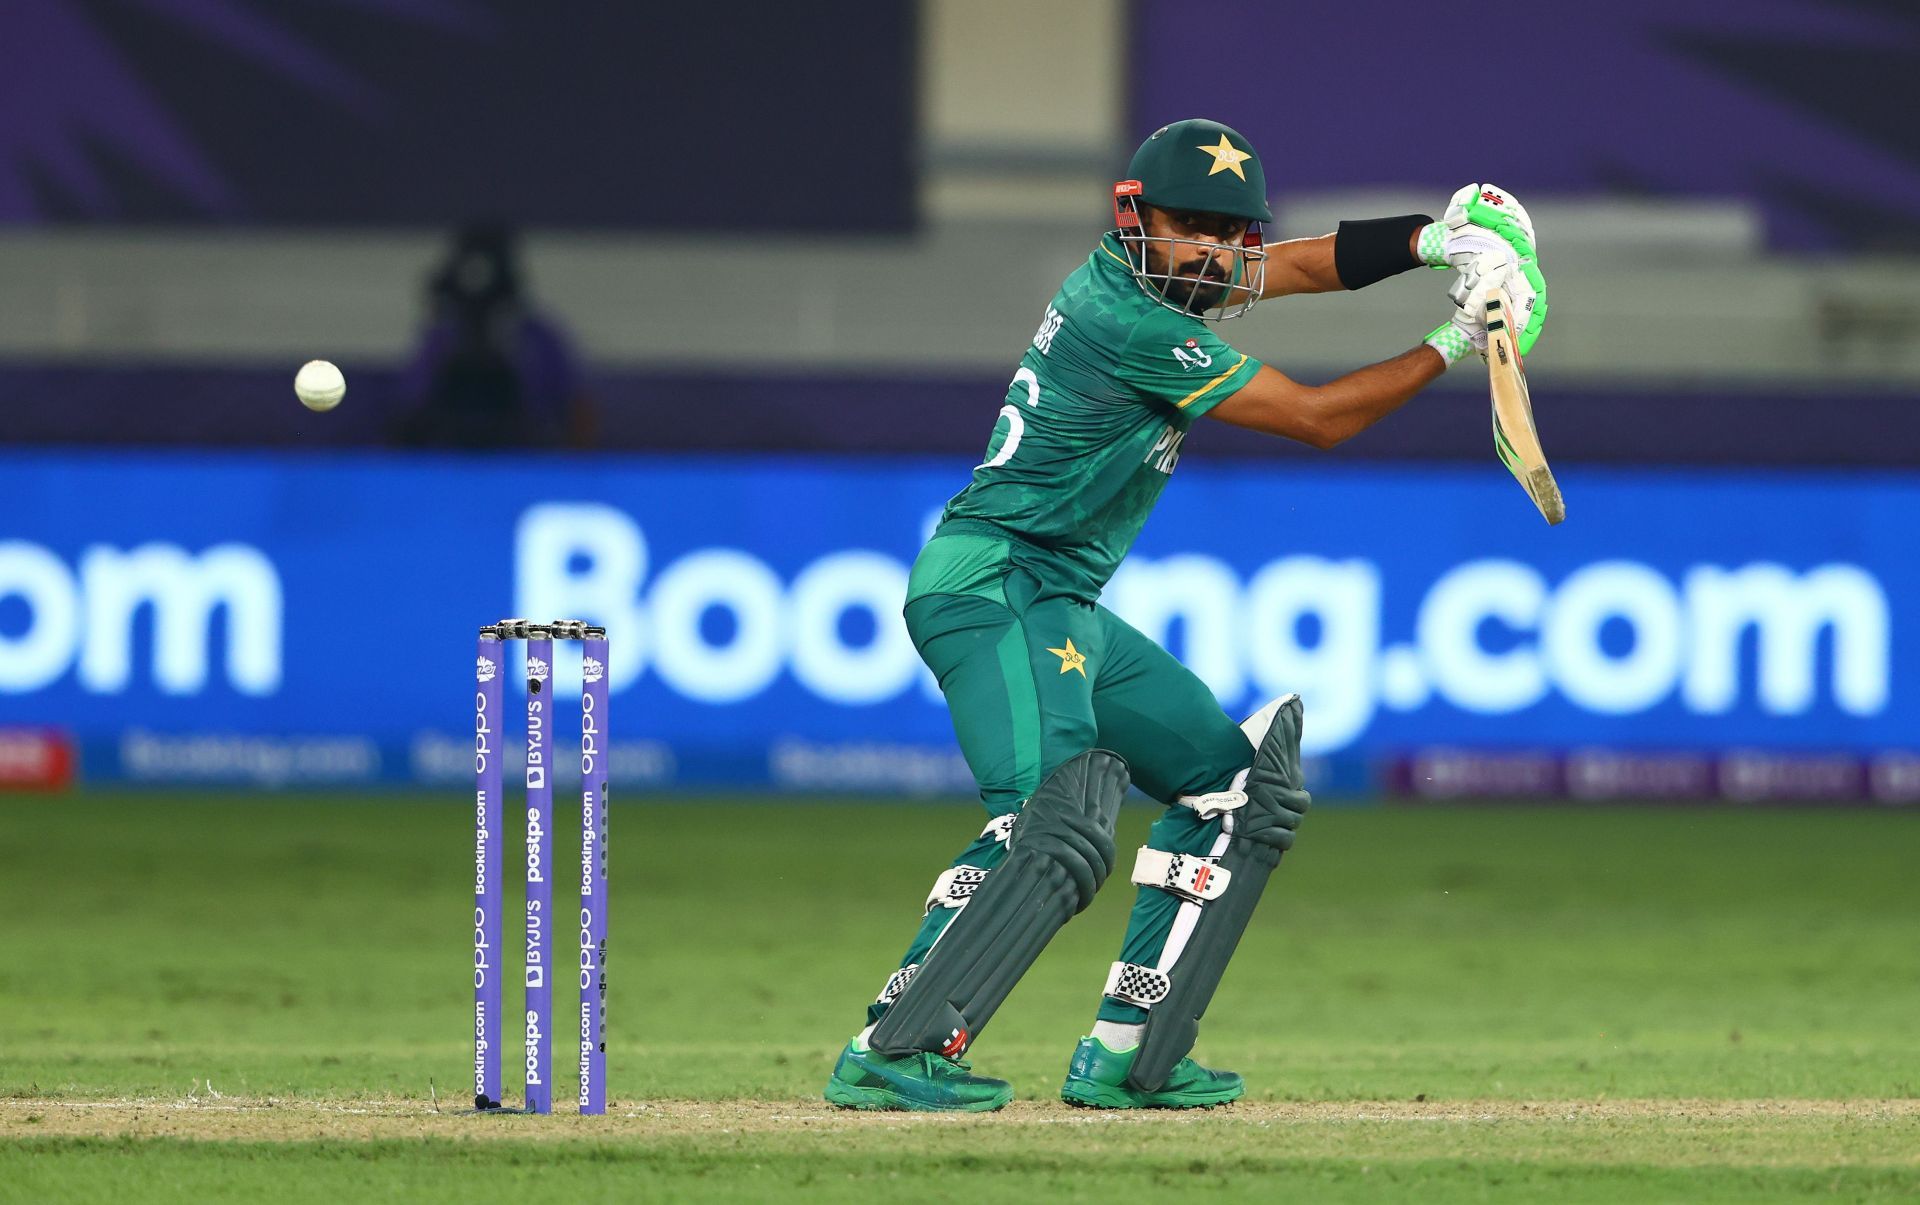 Skipper Babar Azam led the way with a sublime half-century as Pakistan coasted to a 10-wicket victory against India on Sunday.